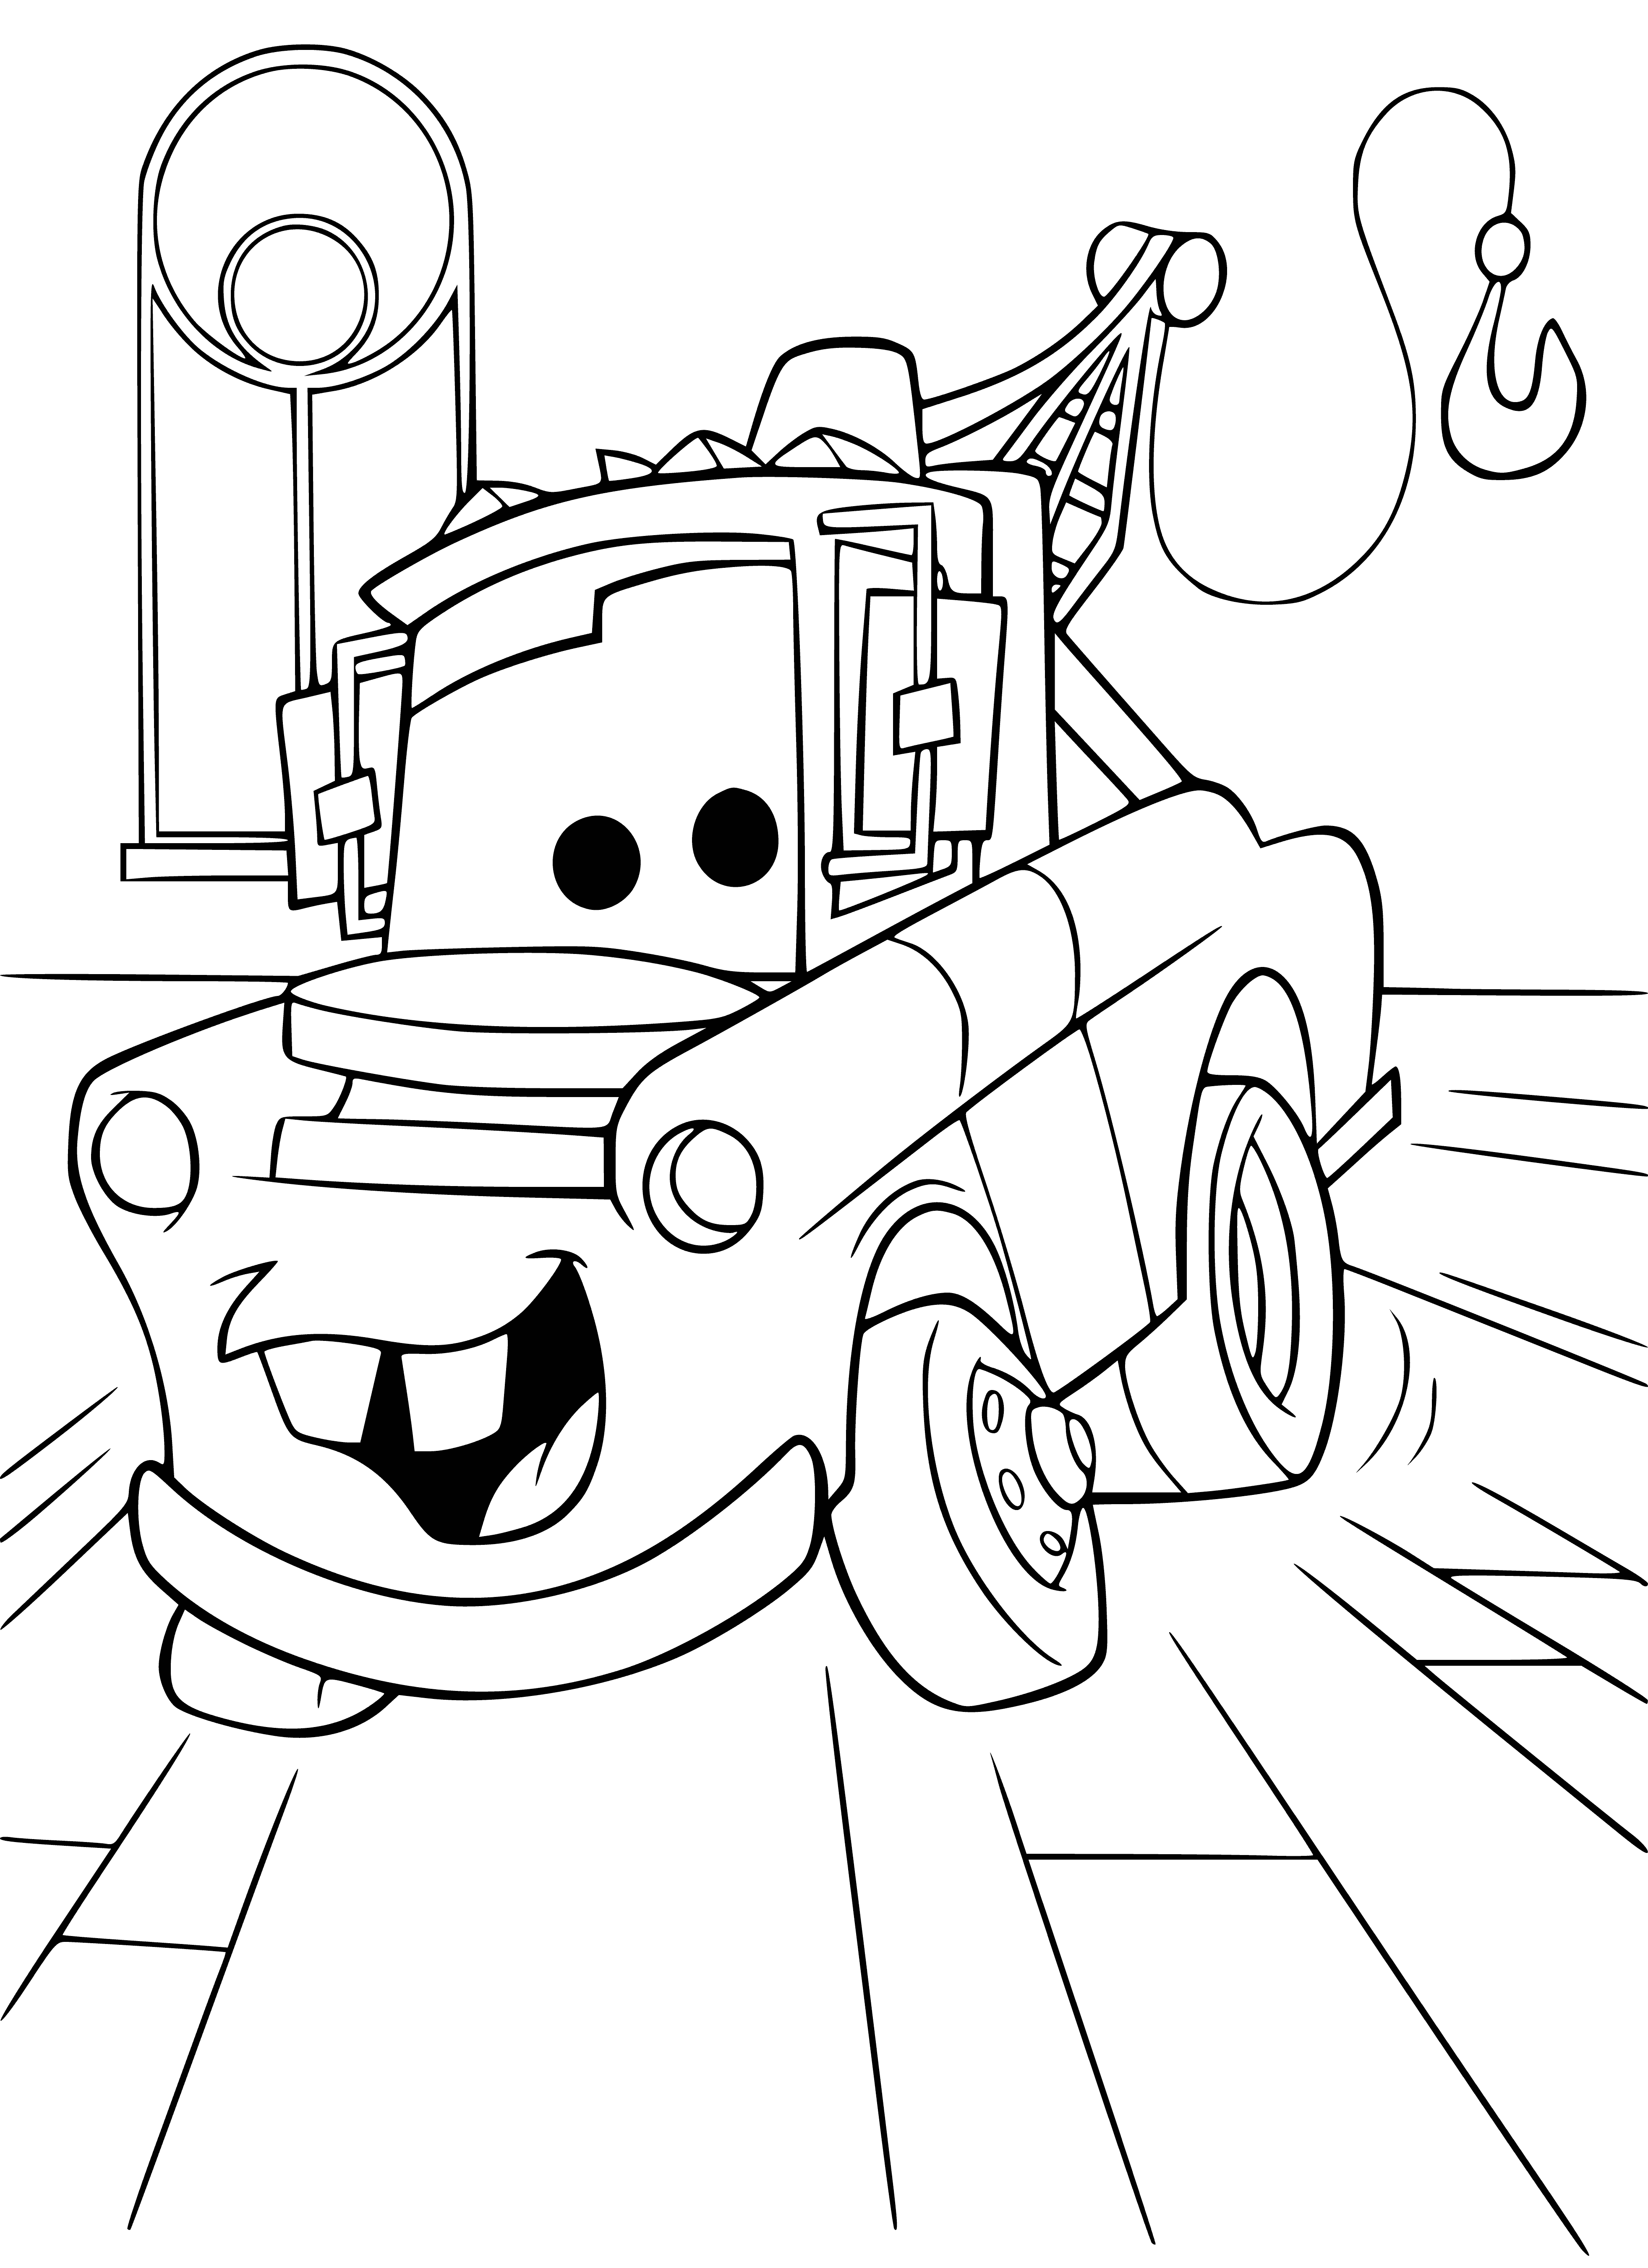 coloring page: Adorable cartoon car coloring page with anthropomorphic features, red with yellow stripes, big tires, and backdrop of blue sky and clouds.